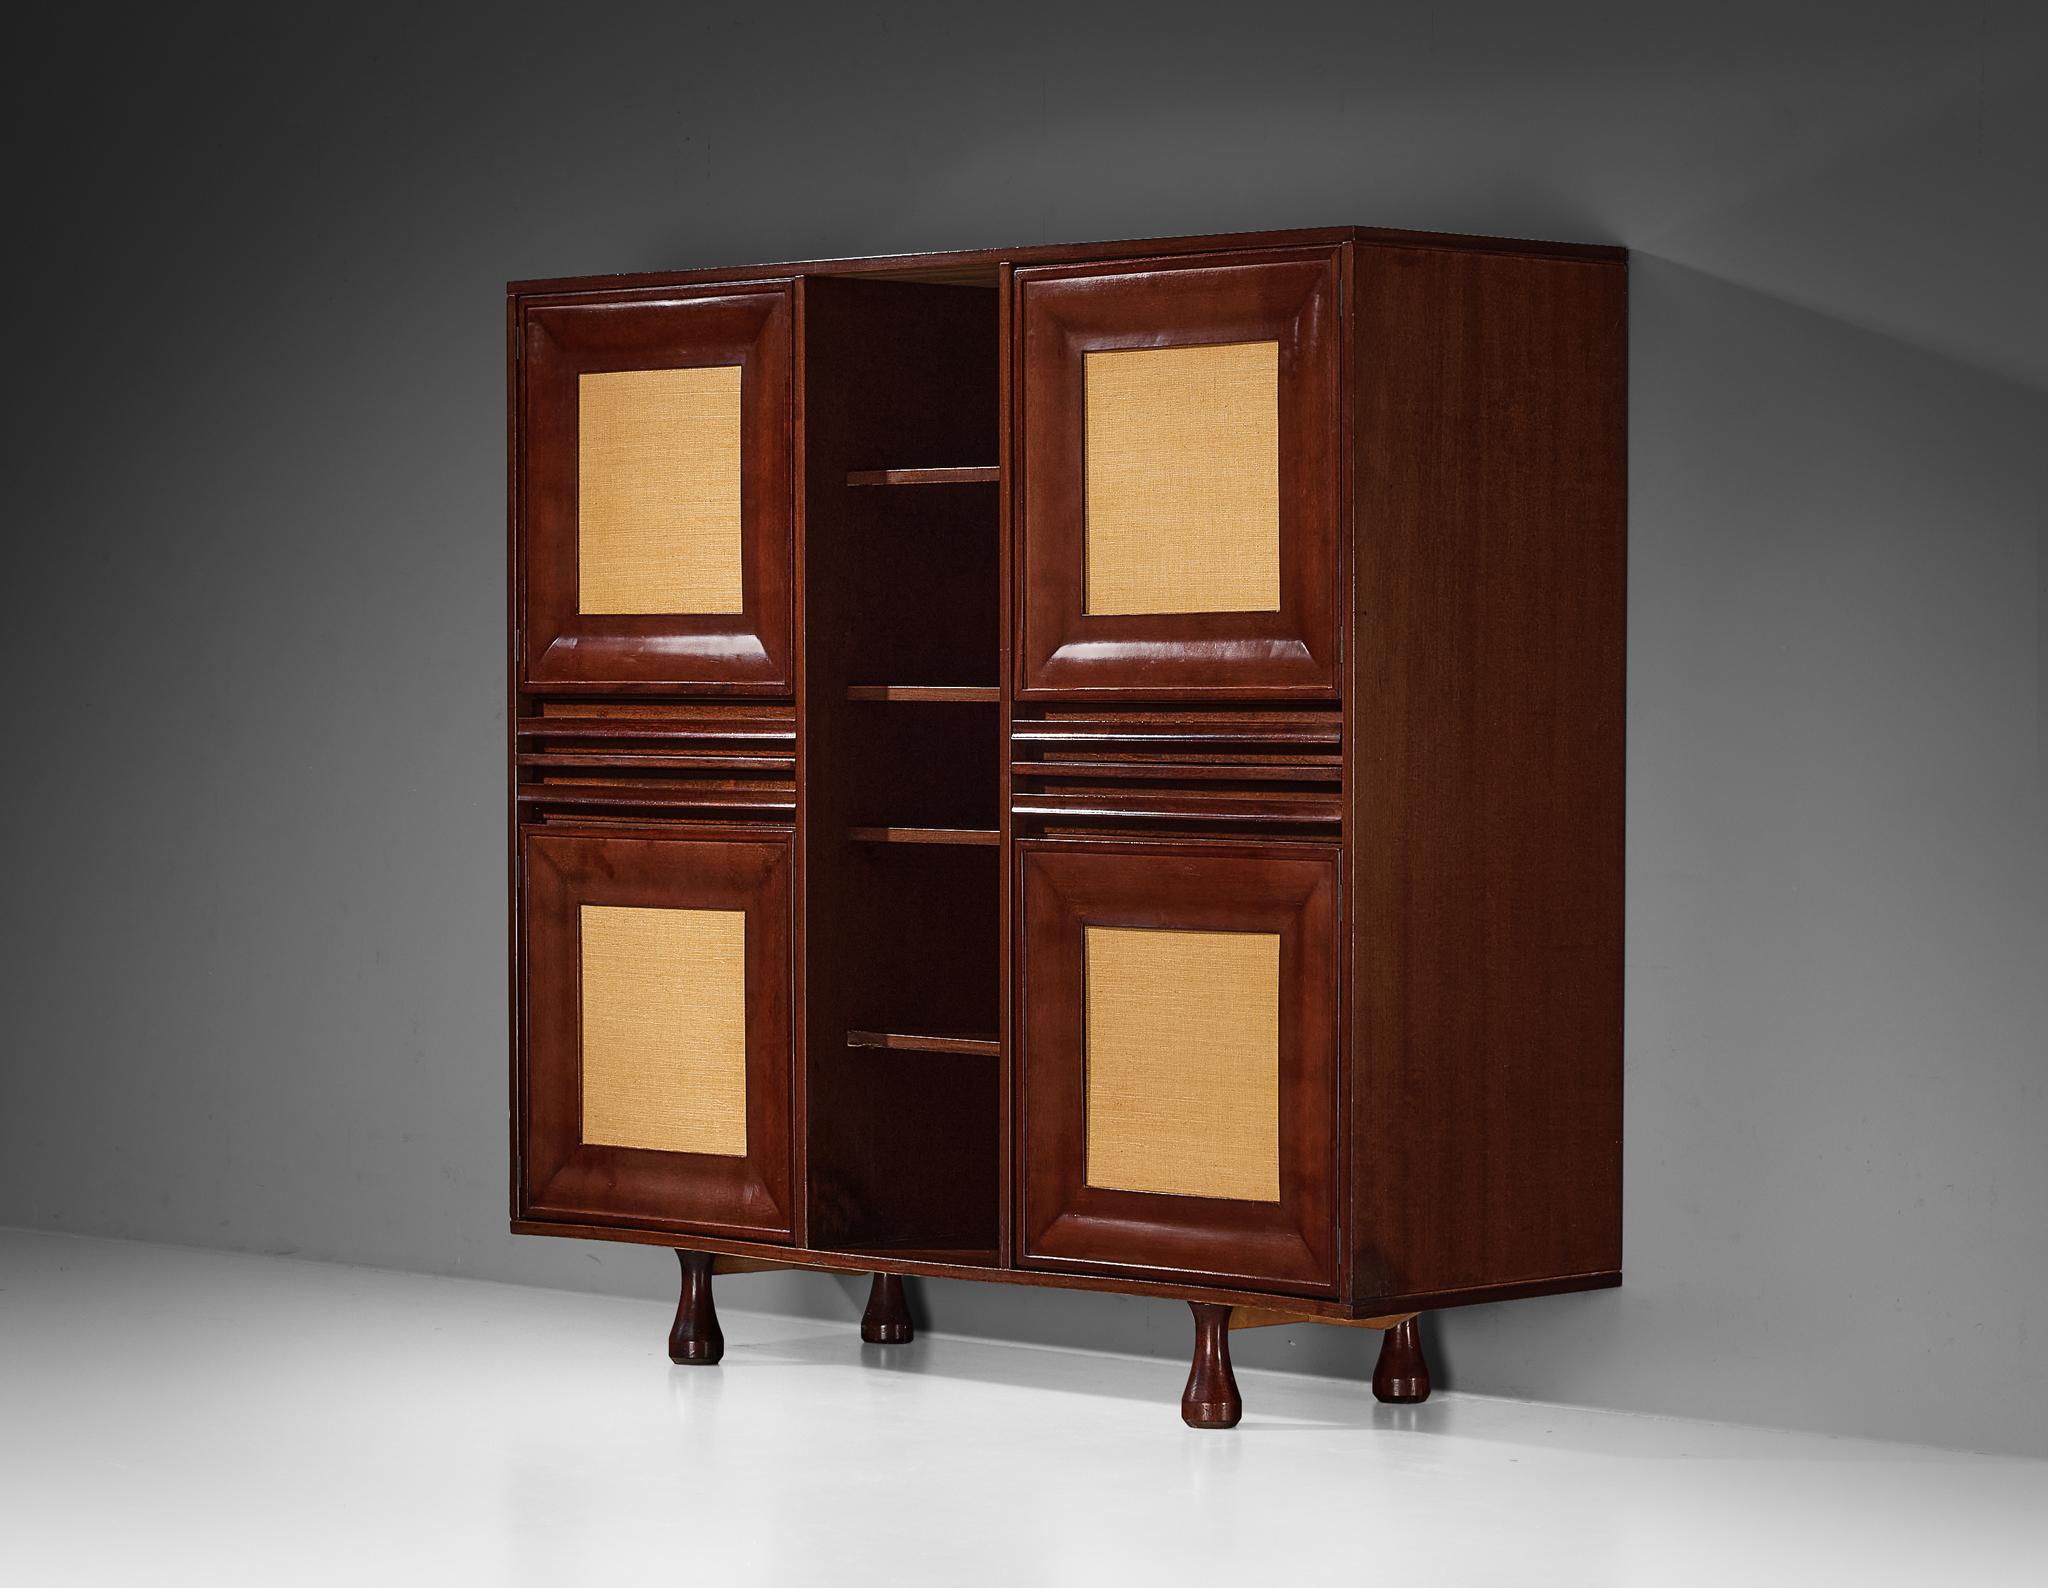 Angelo Mangiarotti for Sorgente dei Mobili, cabinet, mahogany, grasscloth, Italy, 1960s

This outstanding sideboard, dating back to the 1960s, is a design by Angelo Mangiarotti produced for Sorgente dei Mobili. A cubistic layout comprised of four